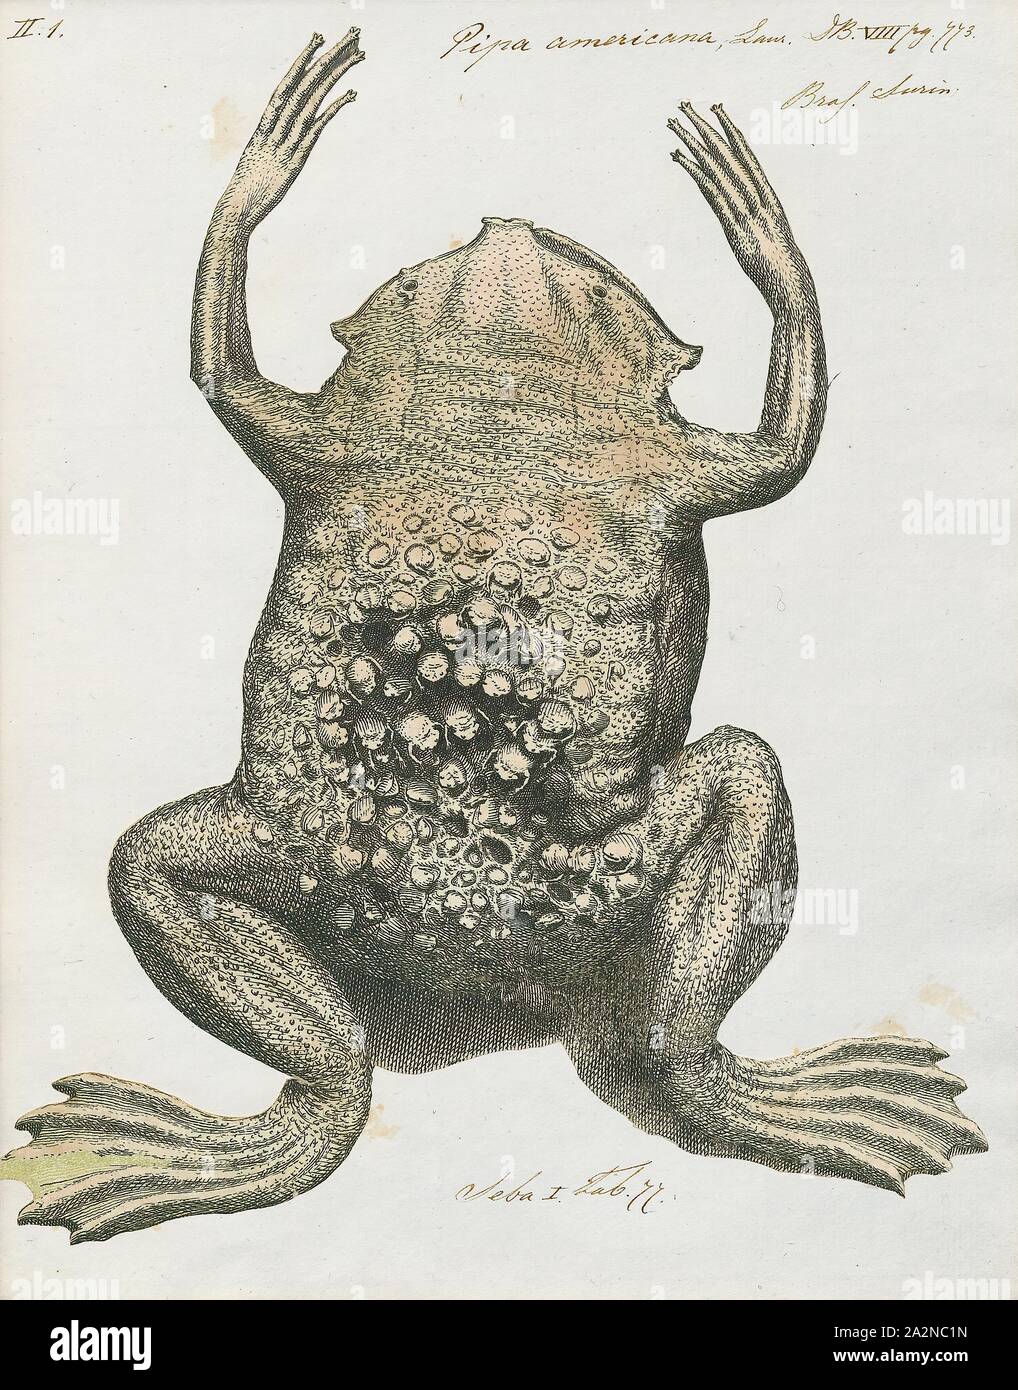 Pipa americana, Print, The common Suriname toad or star-fingered toad (Pipa pipa) is a species of frog in the family Pipidae found in Bolivia, Brazil, Colombia, Ecuador, French Guiana, Guyana, Peru, Suriname, Trinidad and Tobago, and Venezuela. In Spanish it is called aparo, rana comun de celdillas, rana tablacha, sapo chinelo, sapo chola, or sapo de celdas. In Portuguese, it is known as sapo pipa due to its shape, as 'pipa' means kite. Its natural habitats are subtropical or tropical moist lowland forests, subtropical or tropical swamps, swamps, freshwater marshes, and intermittent freshwater Stock Photo